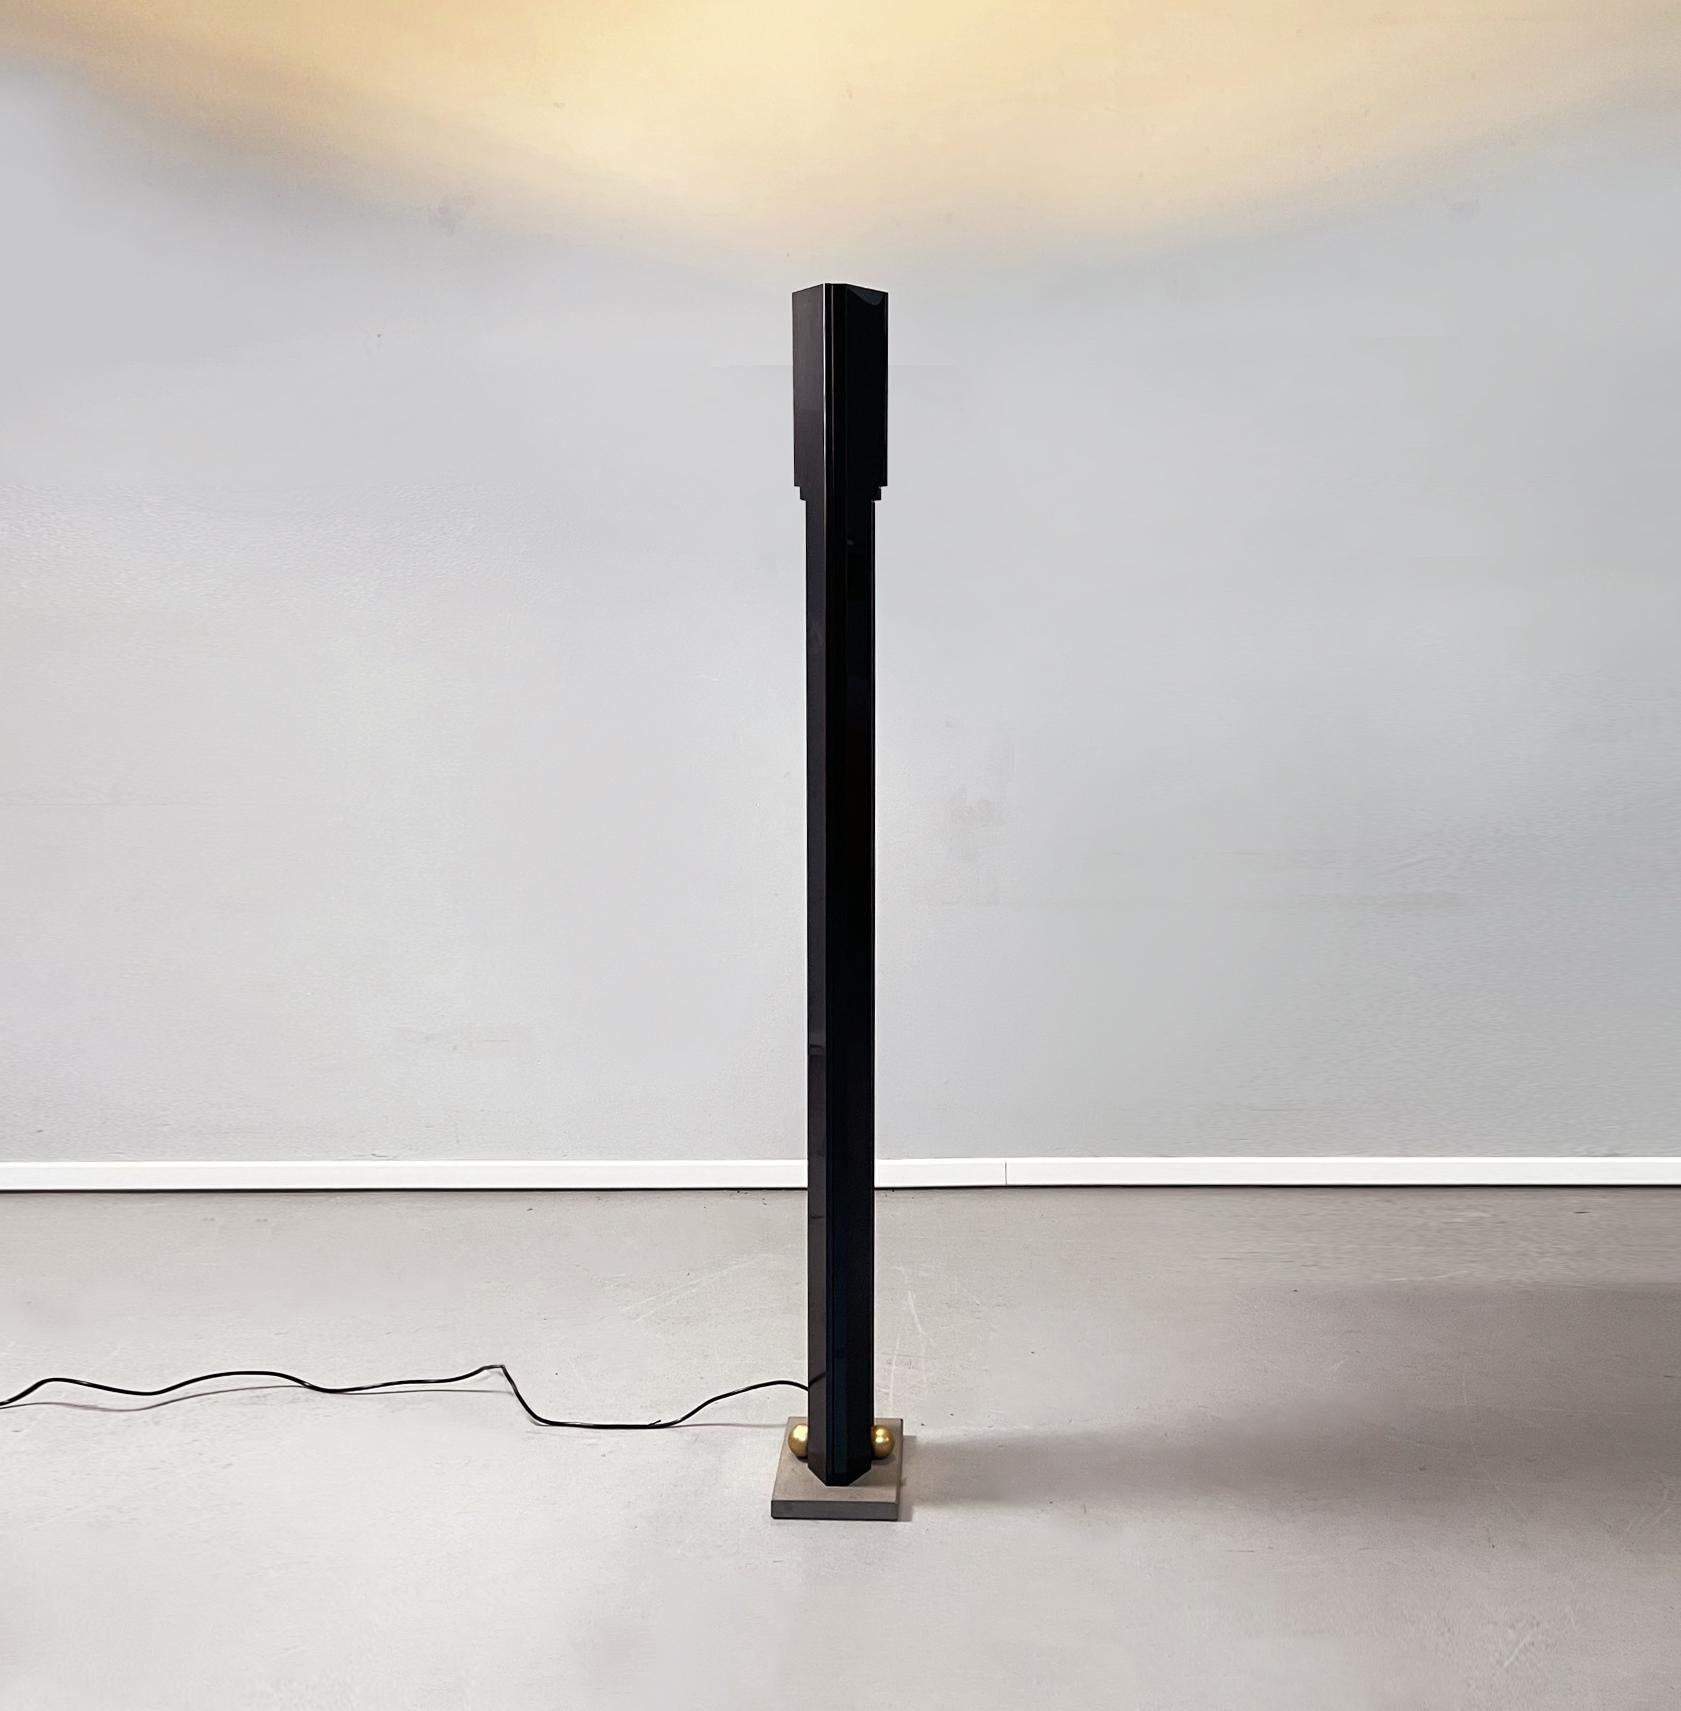 Italian Black steel, brass and sandstone Totem floor lamp by Takahama for Sirrah, 1980s
Totem floor lamp in glossy black enamelled steel with blue reflections and rectangular sandstone base. On this there are two brass spheres. On the central